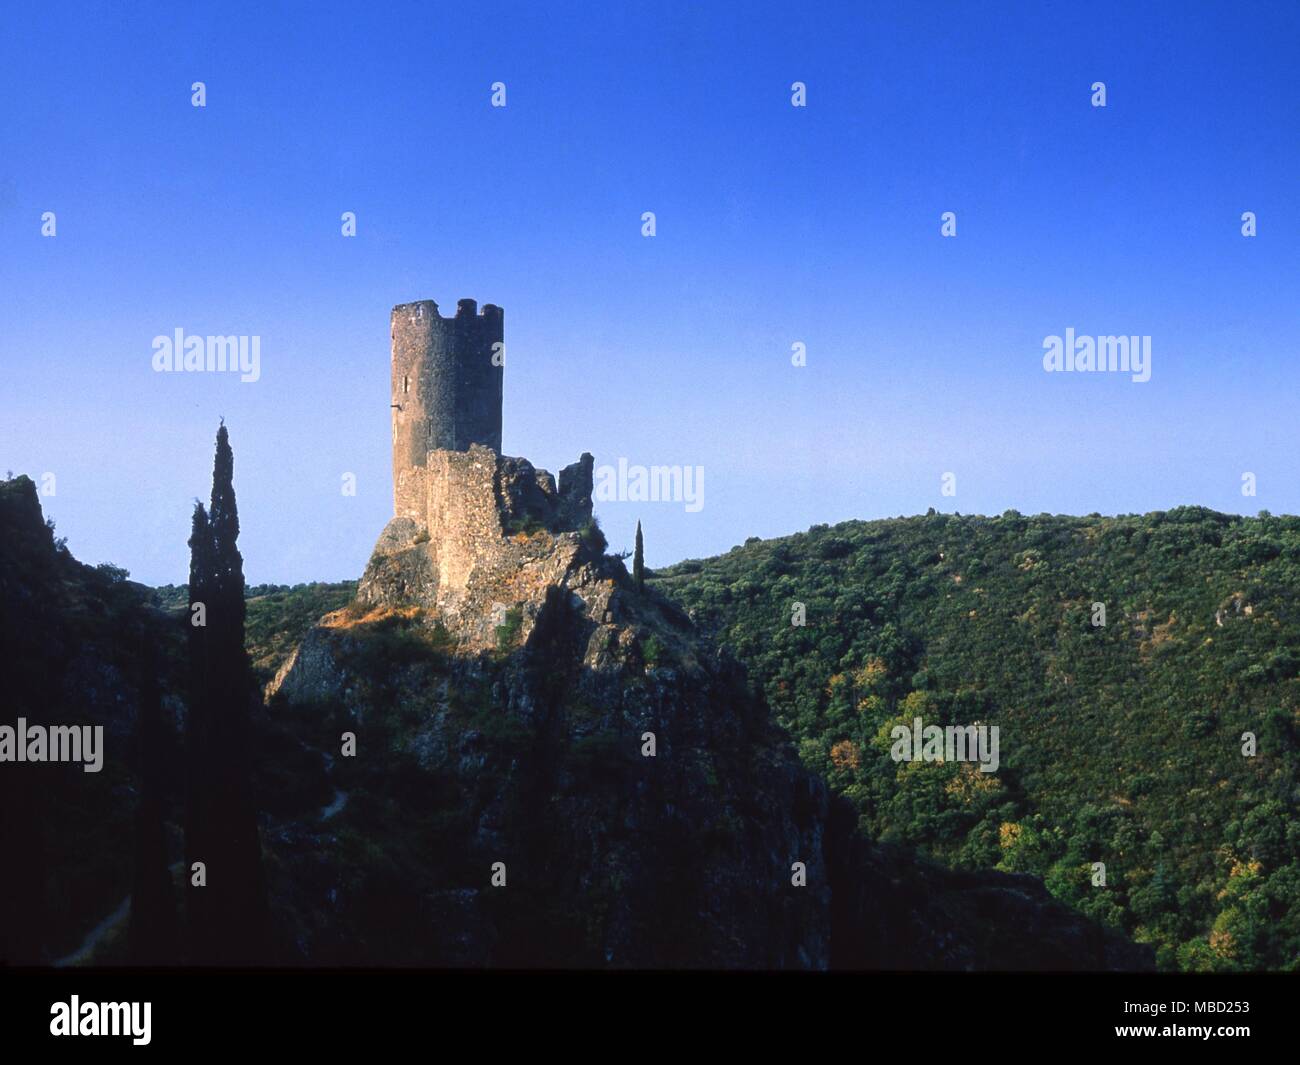 Remains of one of the four mountain strongholds occupied by the Knights Templar in the 13th century. Stock Photo